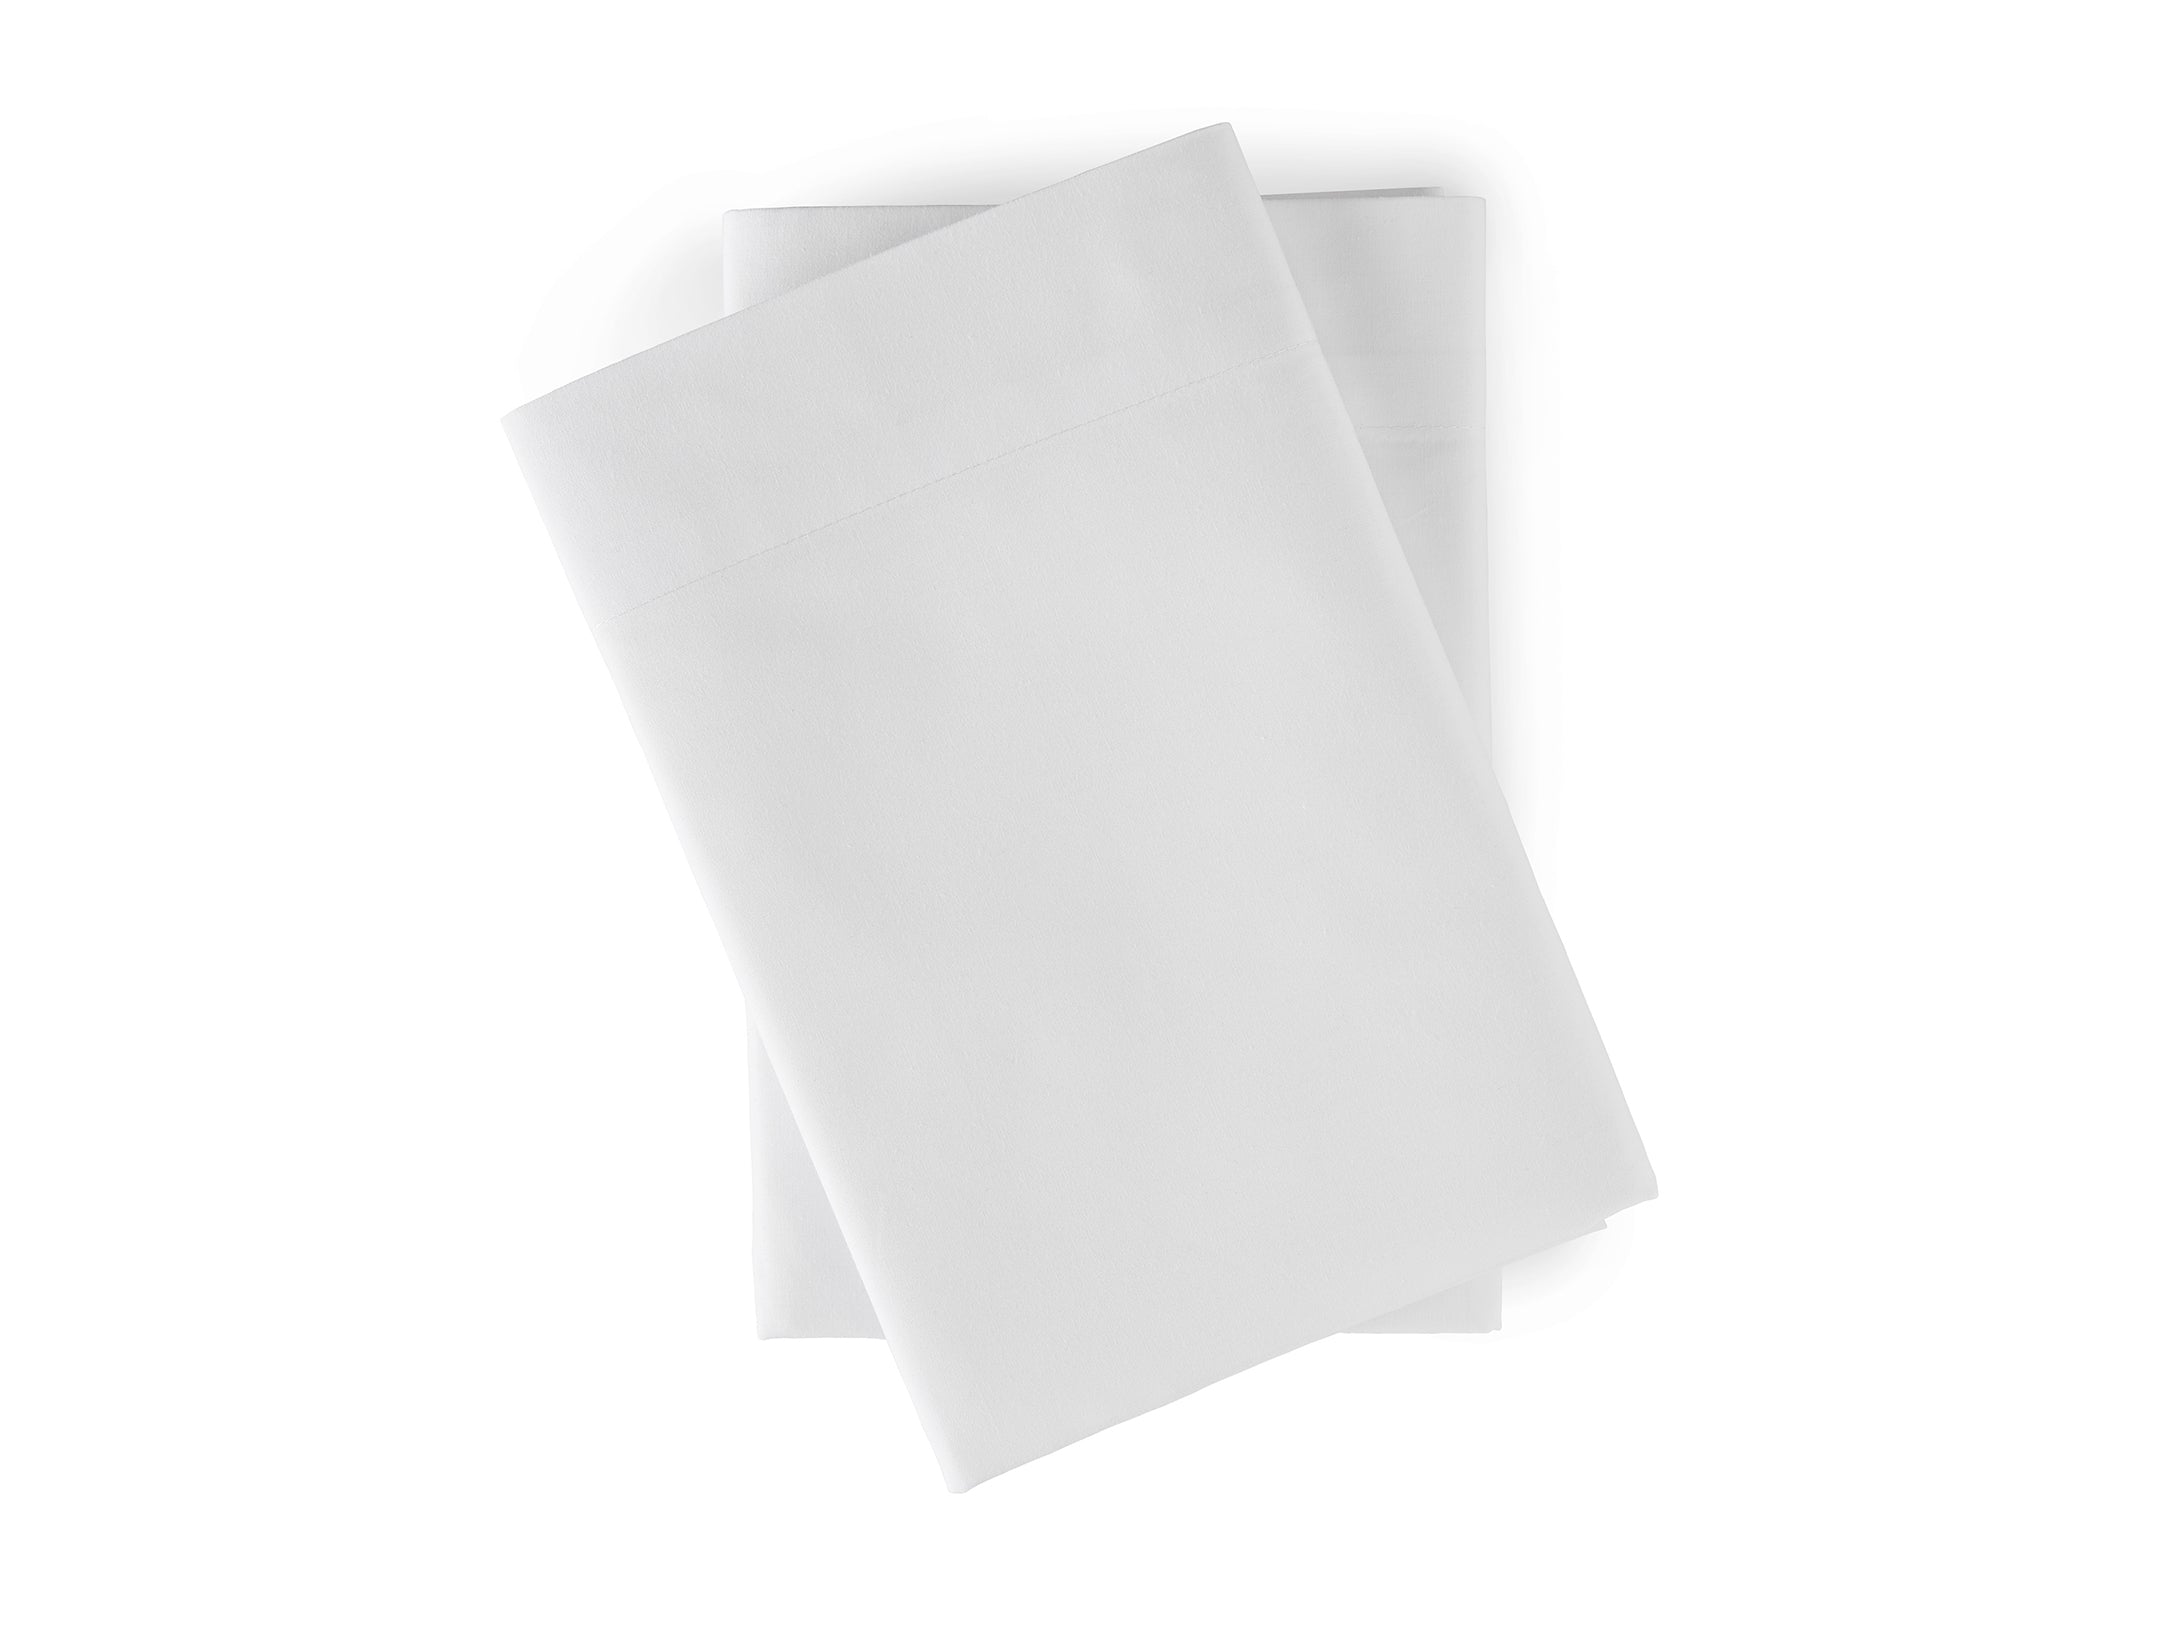 Goto® Percale 2 Pack Pillow Case